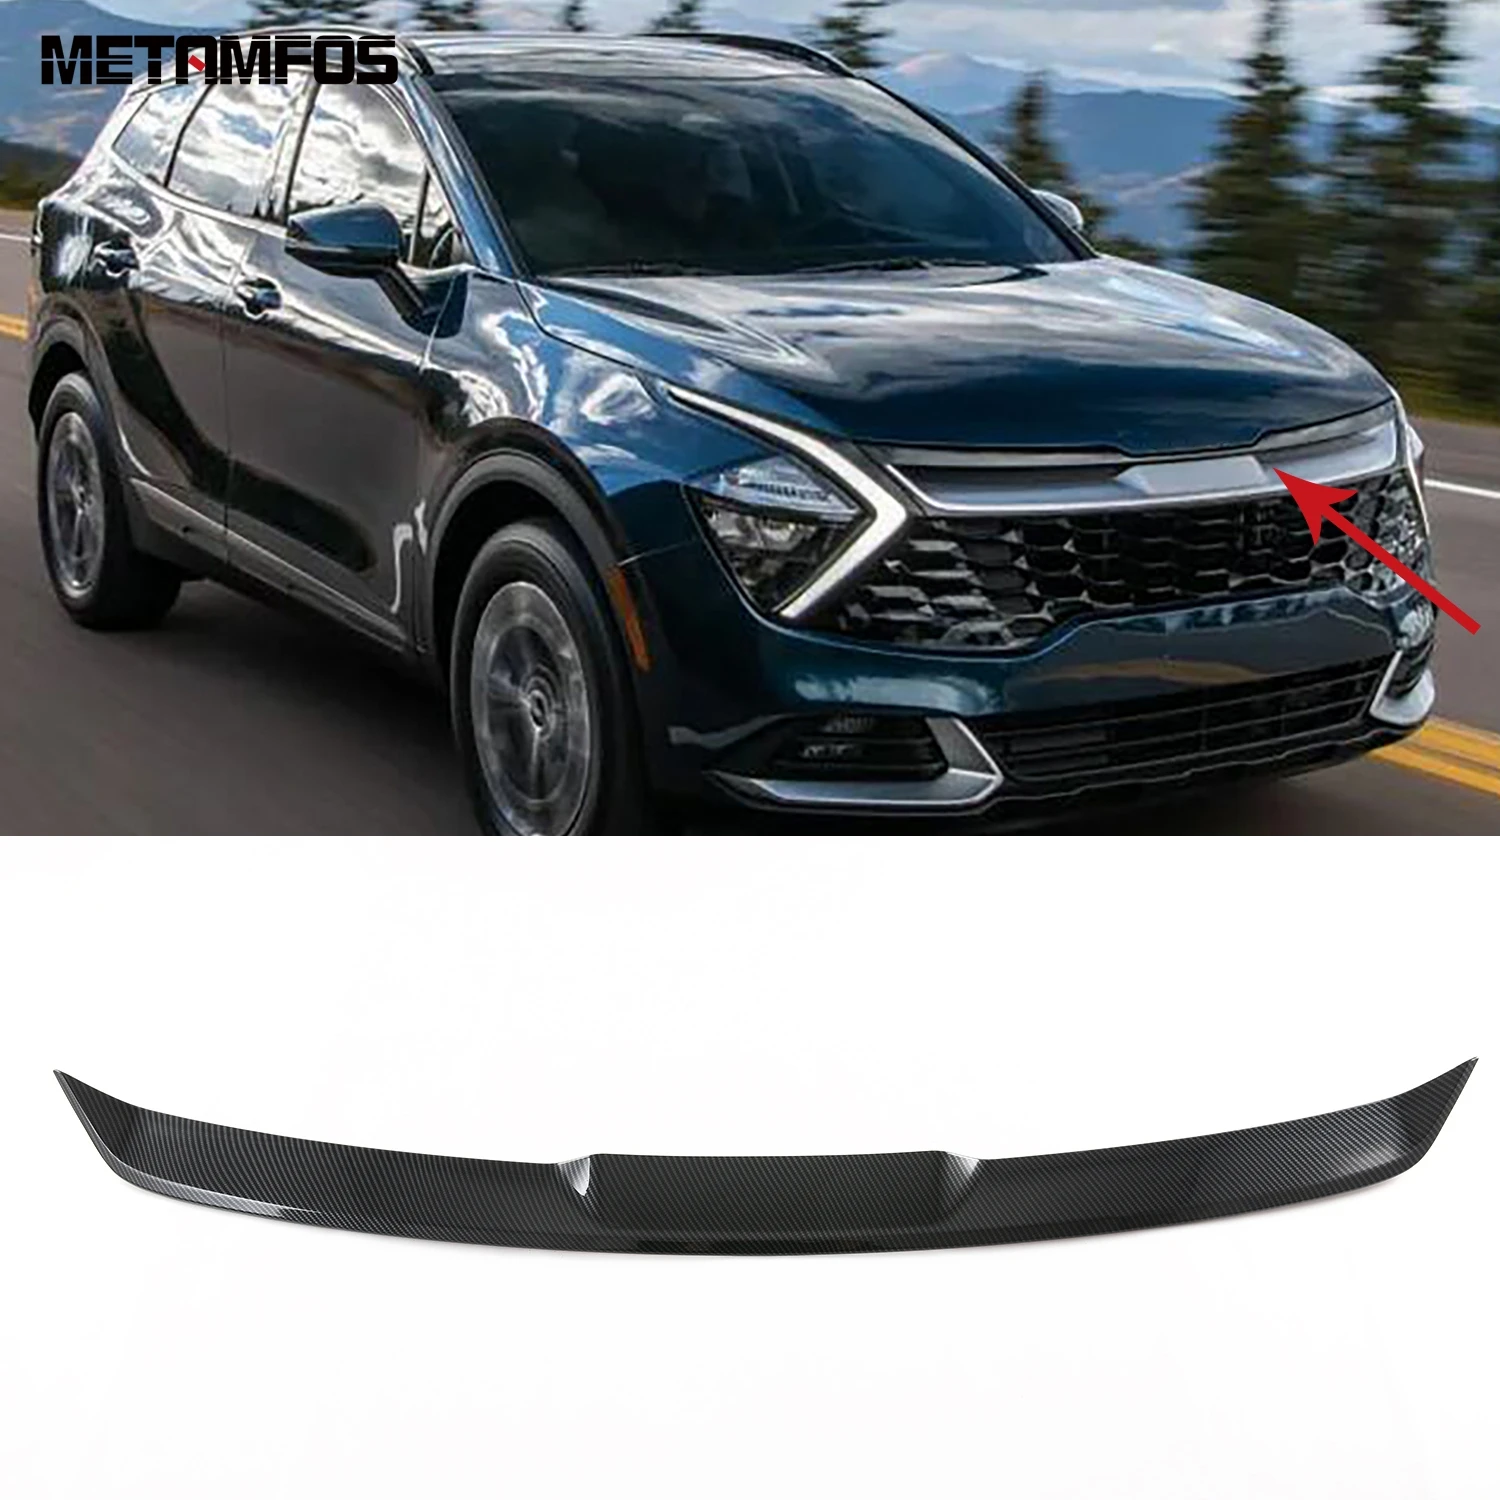 

For Kia Sportage NQ5 2021 2022 2023 Carbon Fiber Front Upper Grille Grill Cover Molding Trim Sticker Accessories Car Styling